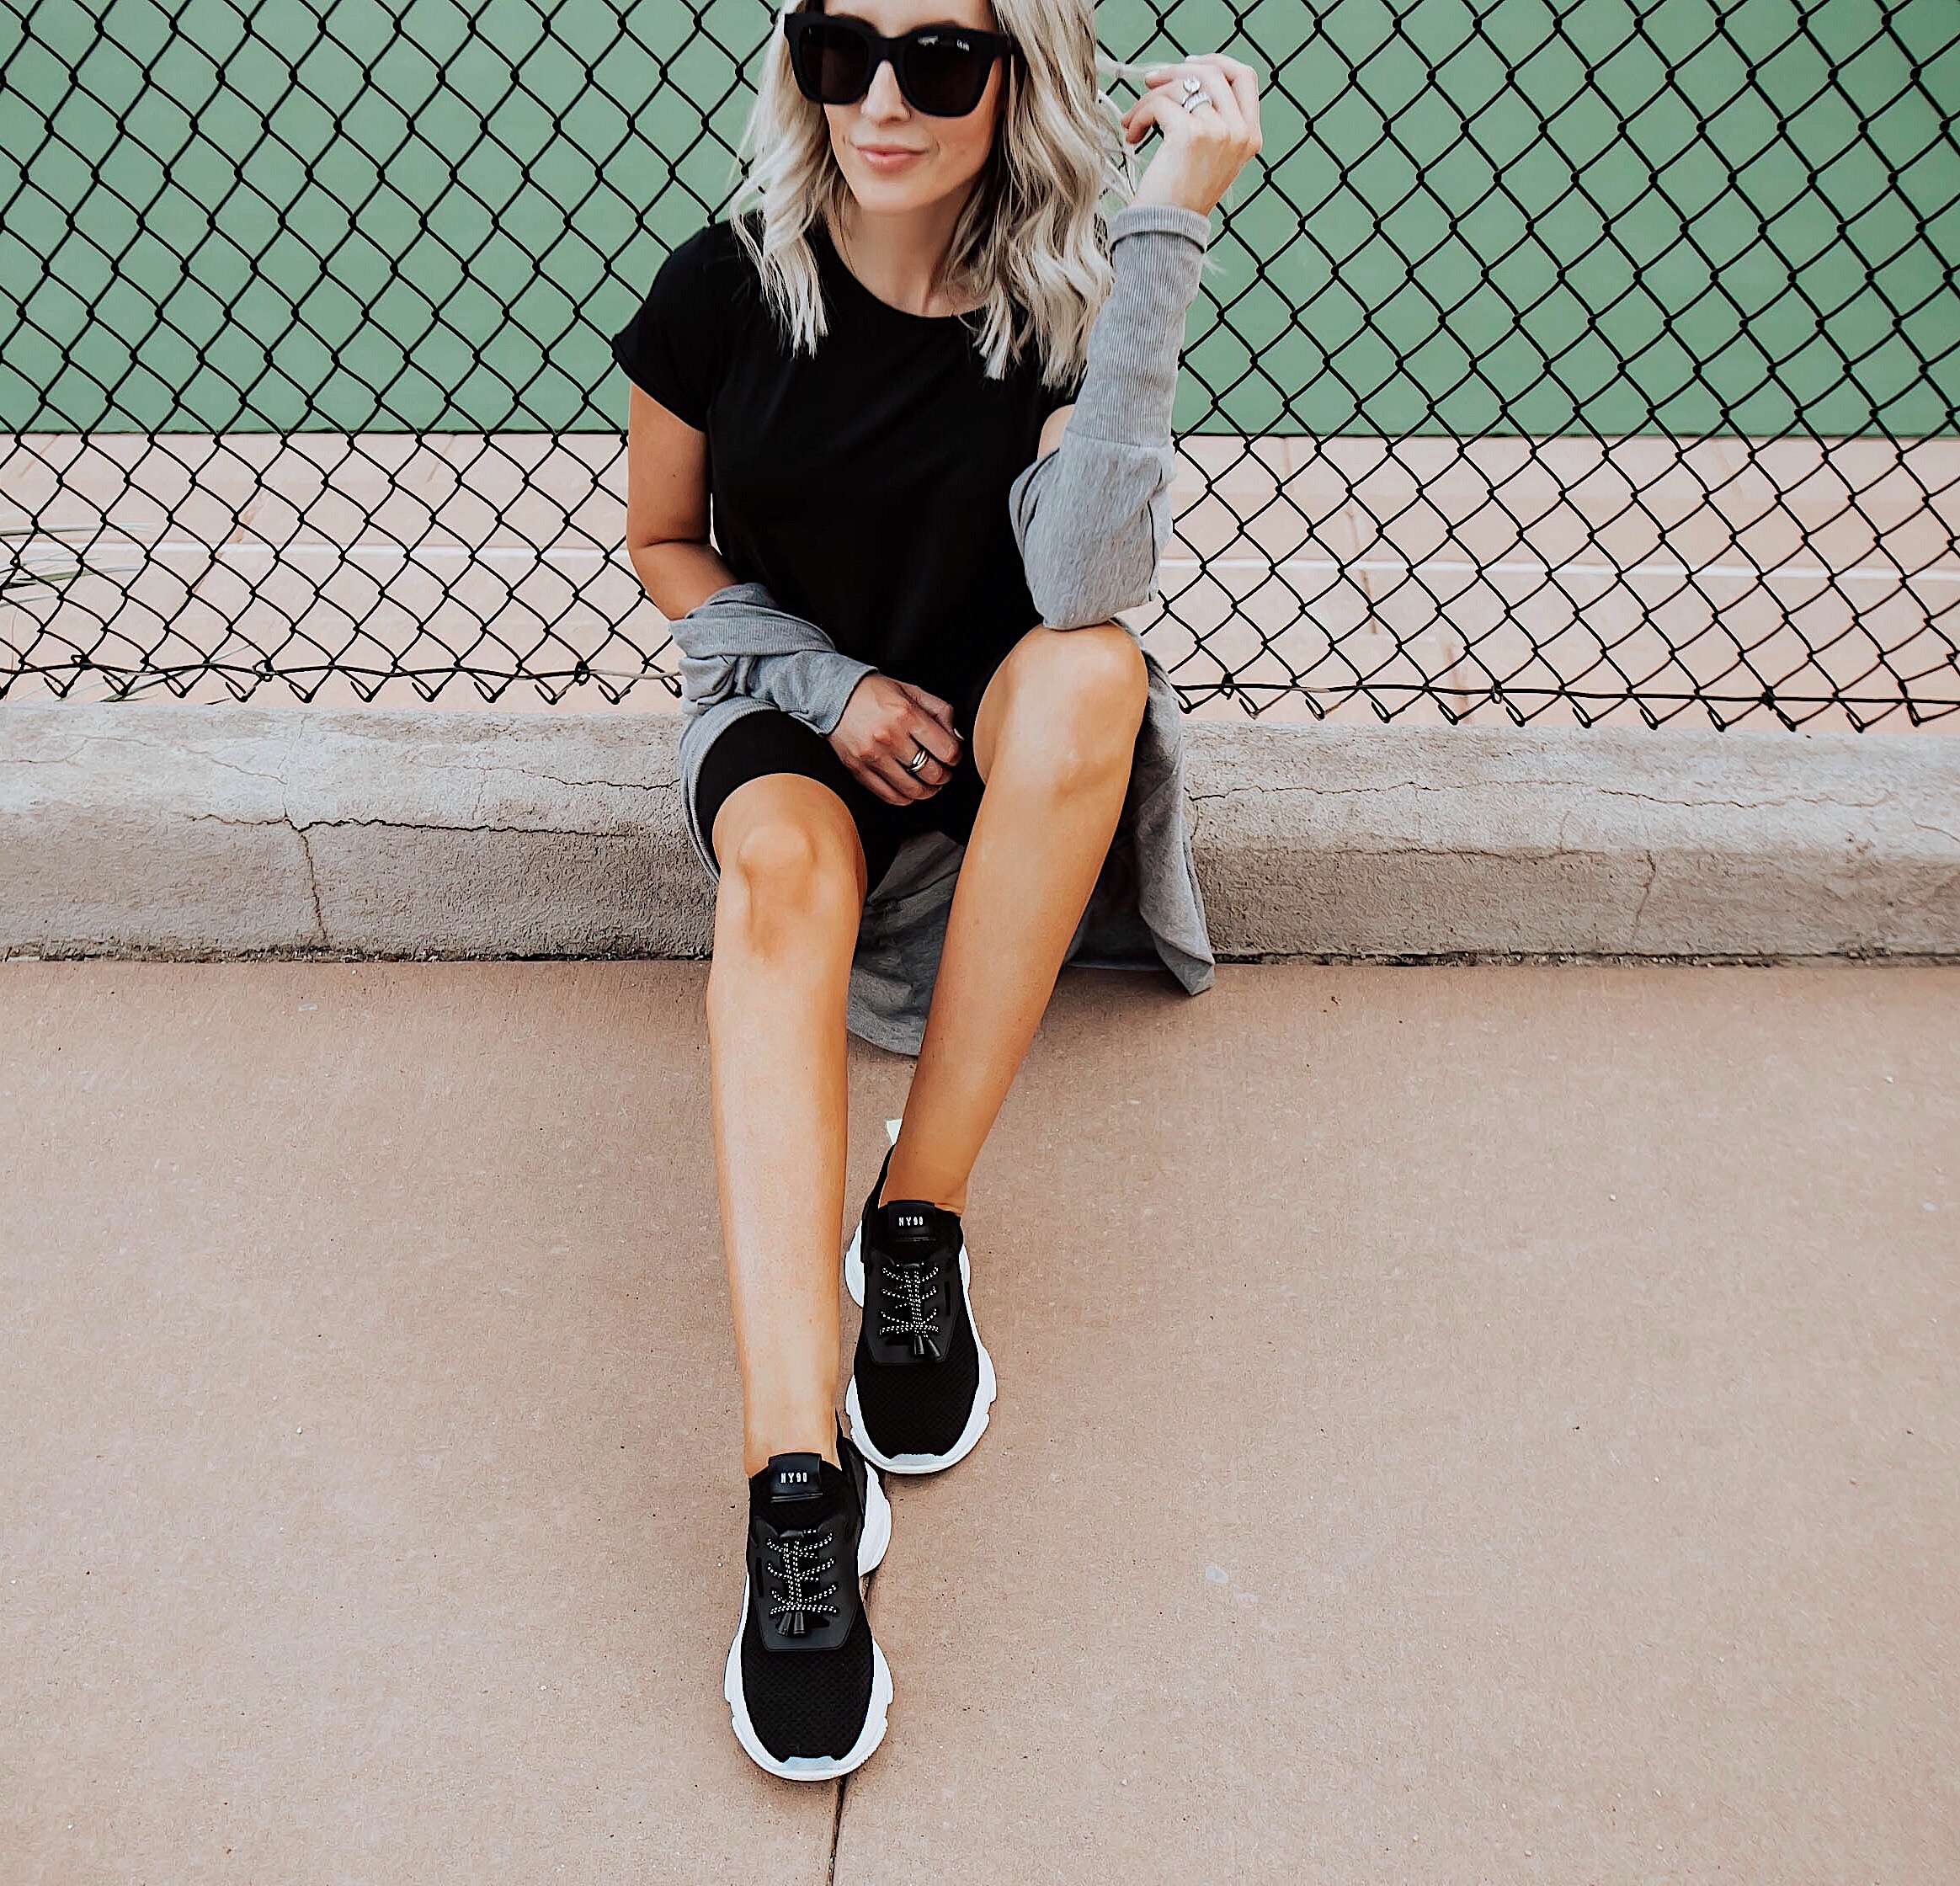 Reno Nevada Blogger, Emily Farren Wieczorek trades in her jean shorts for Bike Shorts and talks about the time she let her blog partner, Ashley, choose her outfit! 